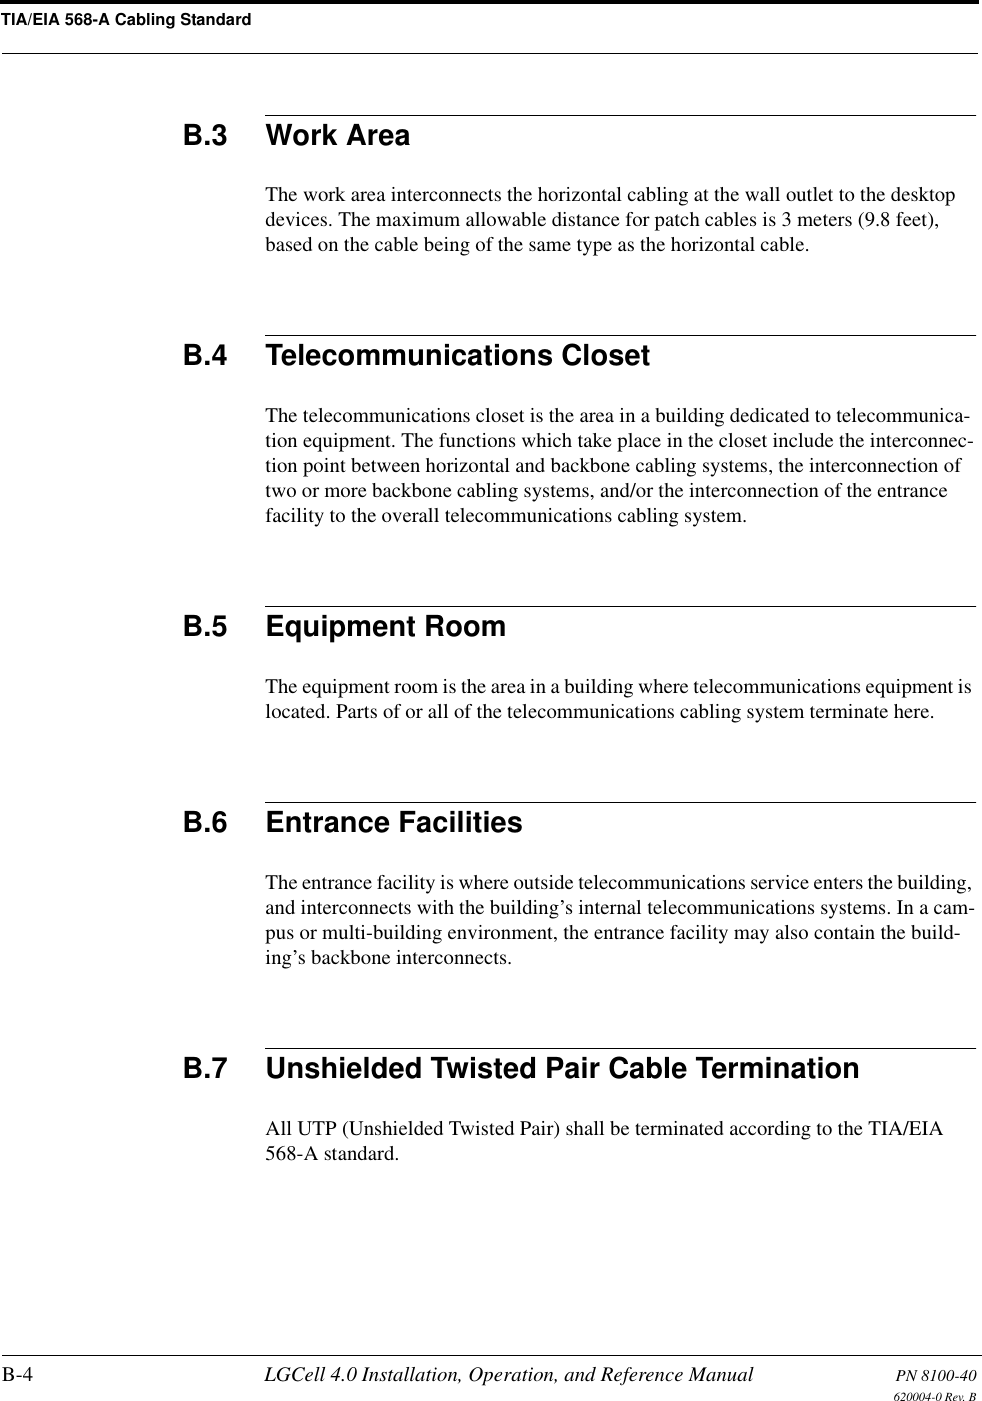 TIA/EIA 568-A Cabling StandardB-4 LGCell 4.0 Installation, Operation, and Reference Manual PN 8100-40620004-0 Rev. BB.3 Work AreaThe work area interconnects the horizontal cabling at the wall outlet to the desktop devices. The maximum allowable distance for patch cables is 3 meters (9.8 feet), based on the cable being of the same type as the horizontal cable.B.4 Telecommunications ClosetThe telecommunications closet is the area in a building dedicated to telecommunica-tion equipment. The functions which take place in the closet include the interconnec-tion point between horizontal and backbone cabling systems, the interconnection of two or more backbone cabling systems, and/or the interconnection of the entrance facility to the overall telecommunications cabling system.B.5 Equipment RoomThe equipment room is the area in a building where telecommunications equipment is located. Parts of or all of the telecommunications cabling system terminate here.B.6 Entrance FacilitiesThe entrance facility is where outside telecommunications service enters the building, and interconnects with the building’s internal telecommunications systems. In a cam-pus or multi-building environment, the entrance facility may also contain the build-ing’s backbone interconnects.B.7 Unshielded Twisted Pair Cable TerminationAll UTP (Unshielded Twisted Pair) shall be terminated according to the TIA/EIA 568-A standard.